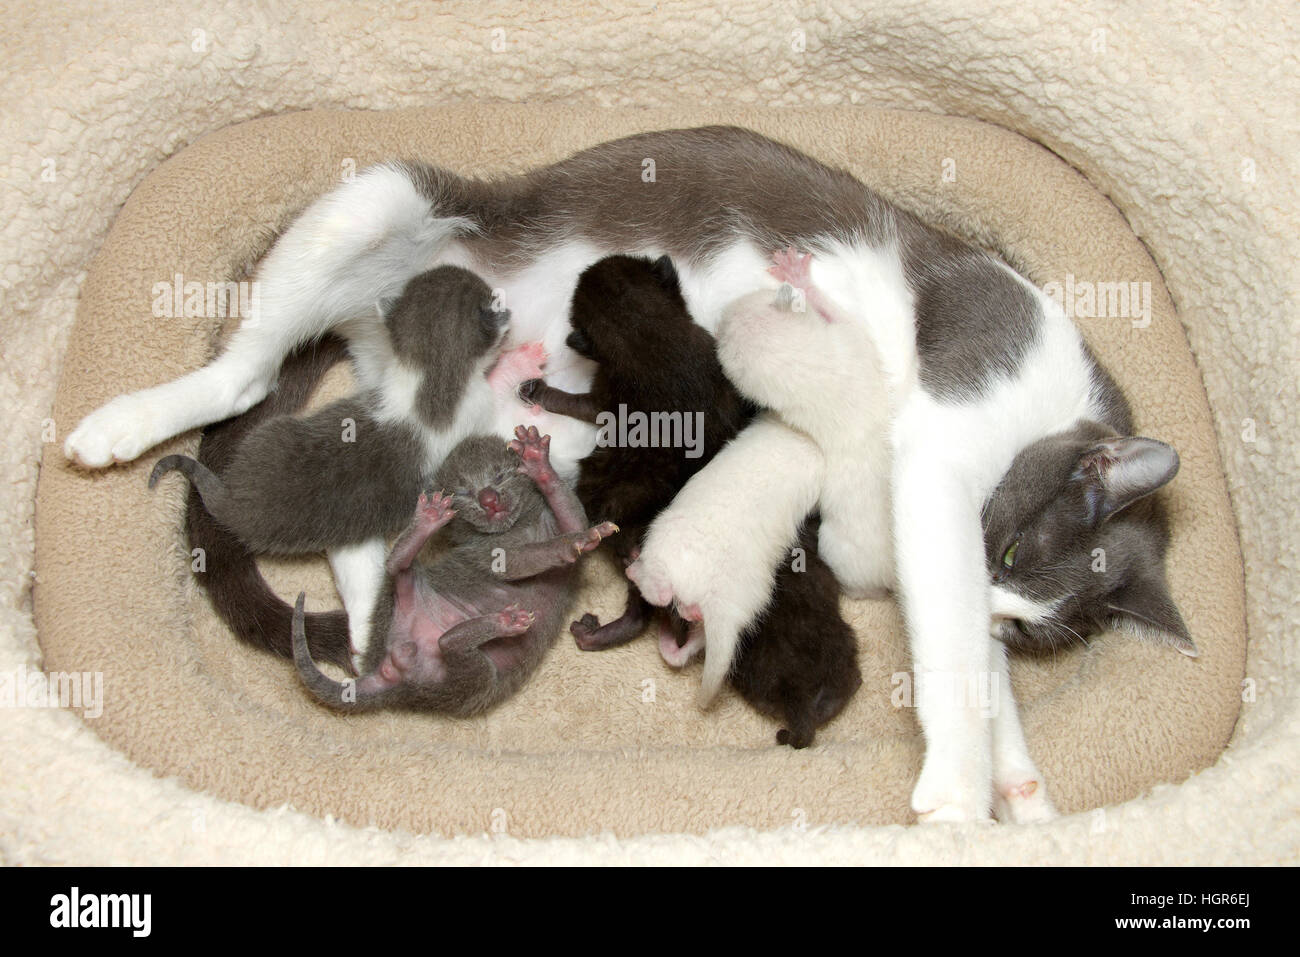 Gray and white tabby cat mother, nursing six newborn babies. Gray, white and black kittens pushing in to nurse, gray kitten upside down trying to get Stock Photo